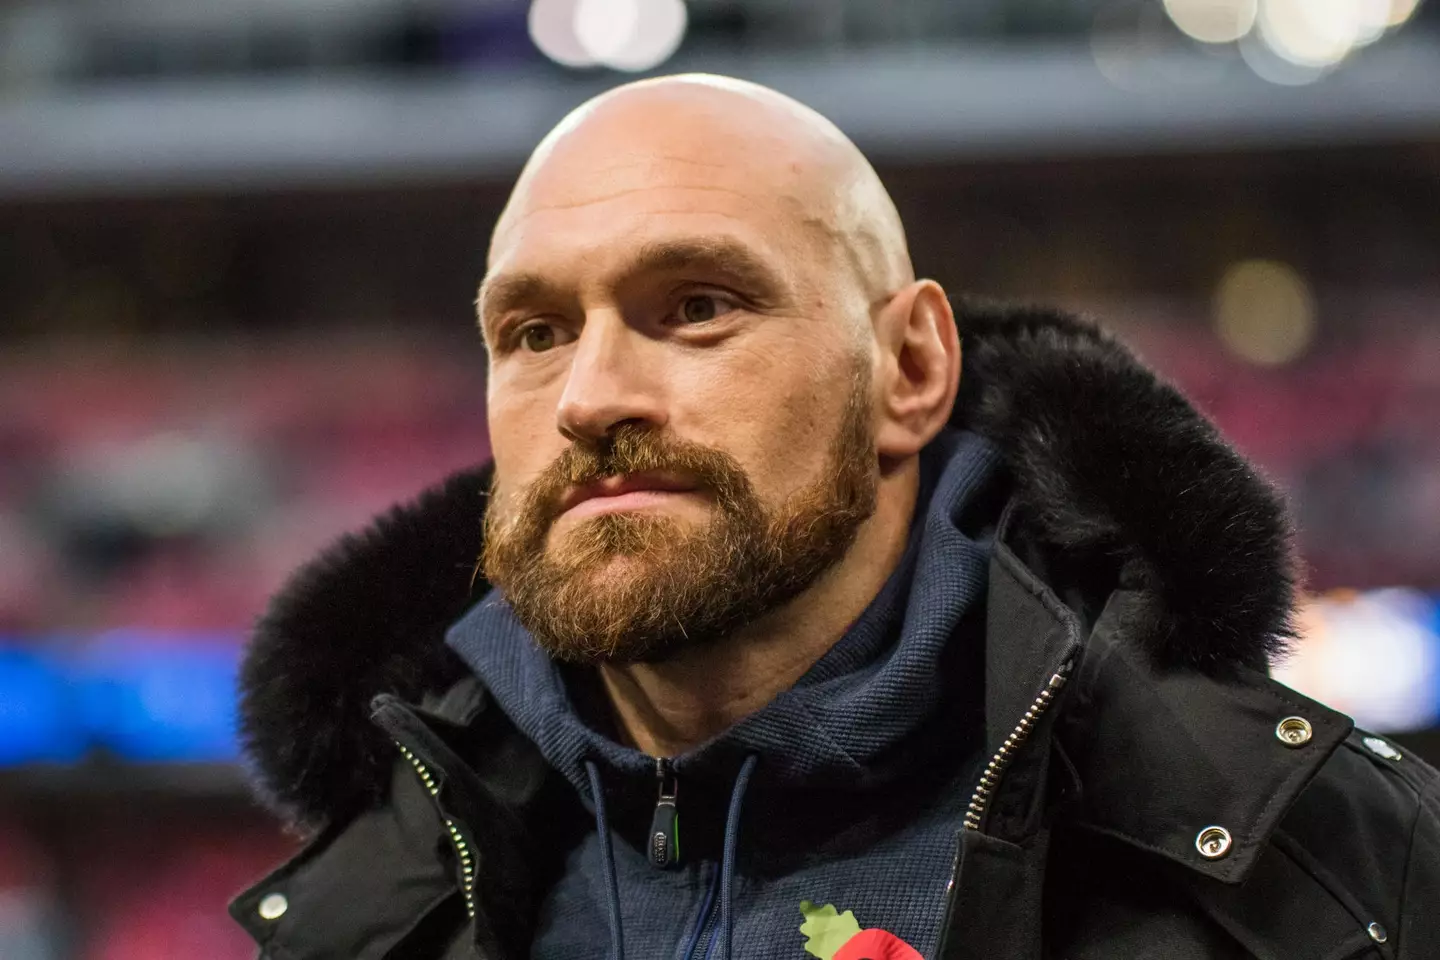 Tyson Fury has called for people who are caught carrying knives to be castrated.